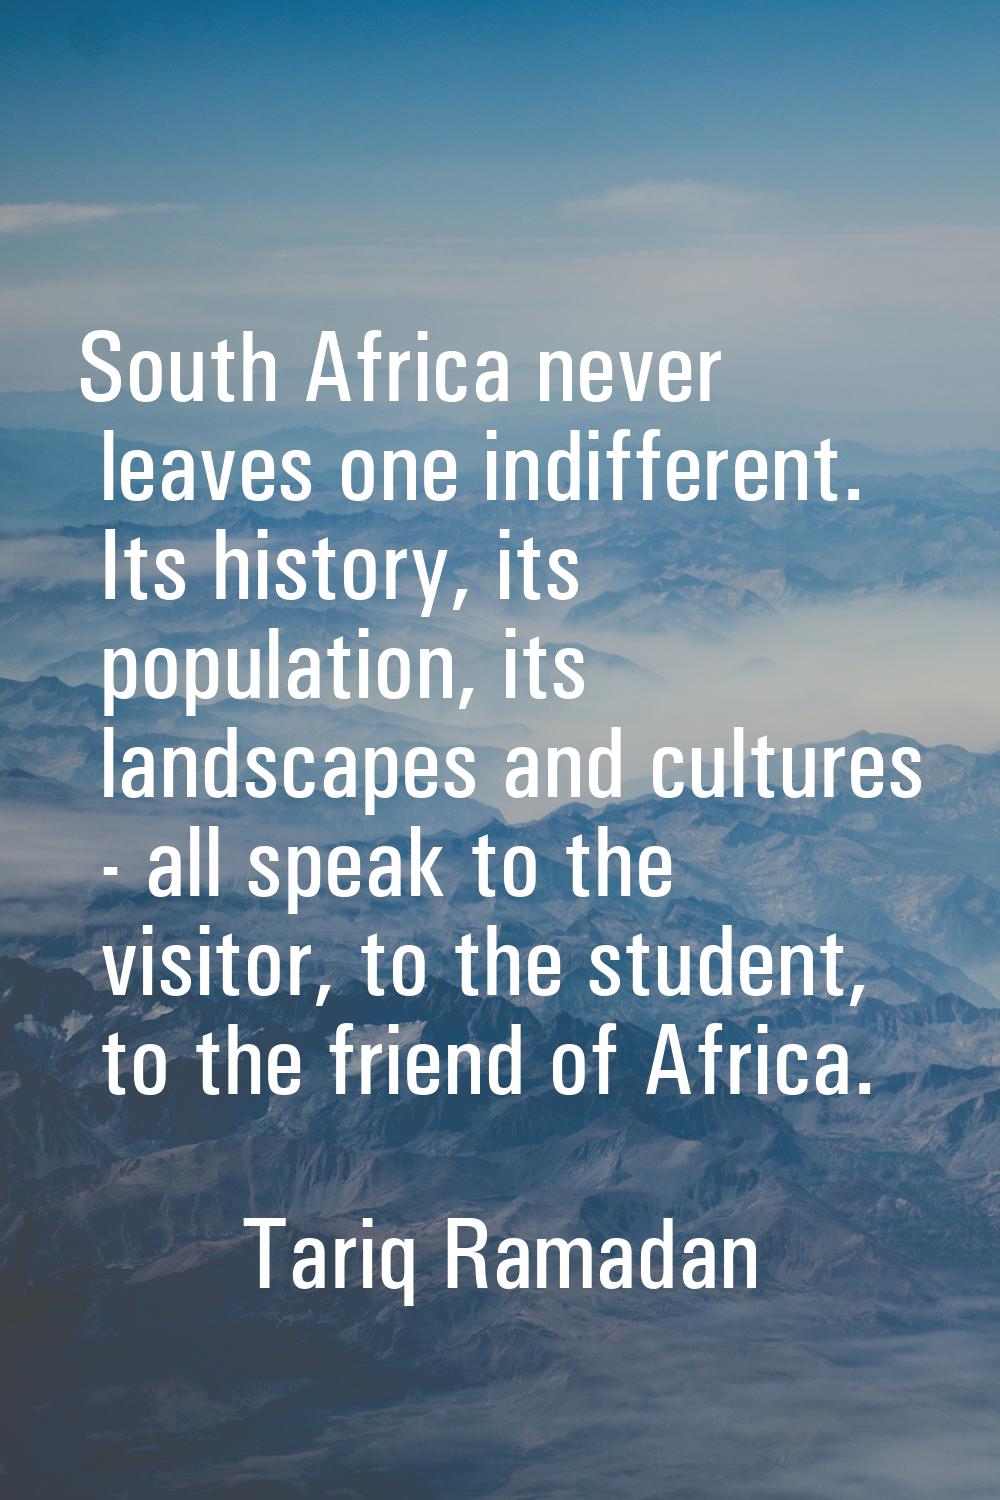 South Africa never leaves one indifferent. Its history, its population, its landscapes and cultures